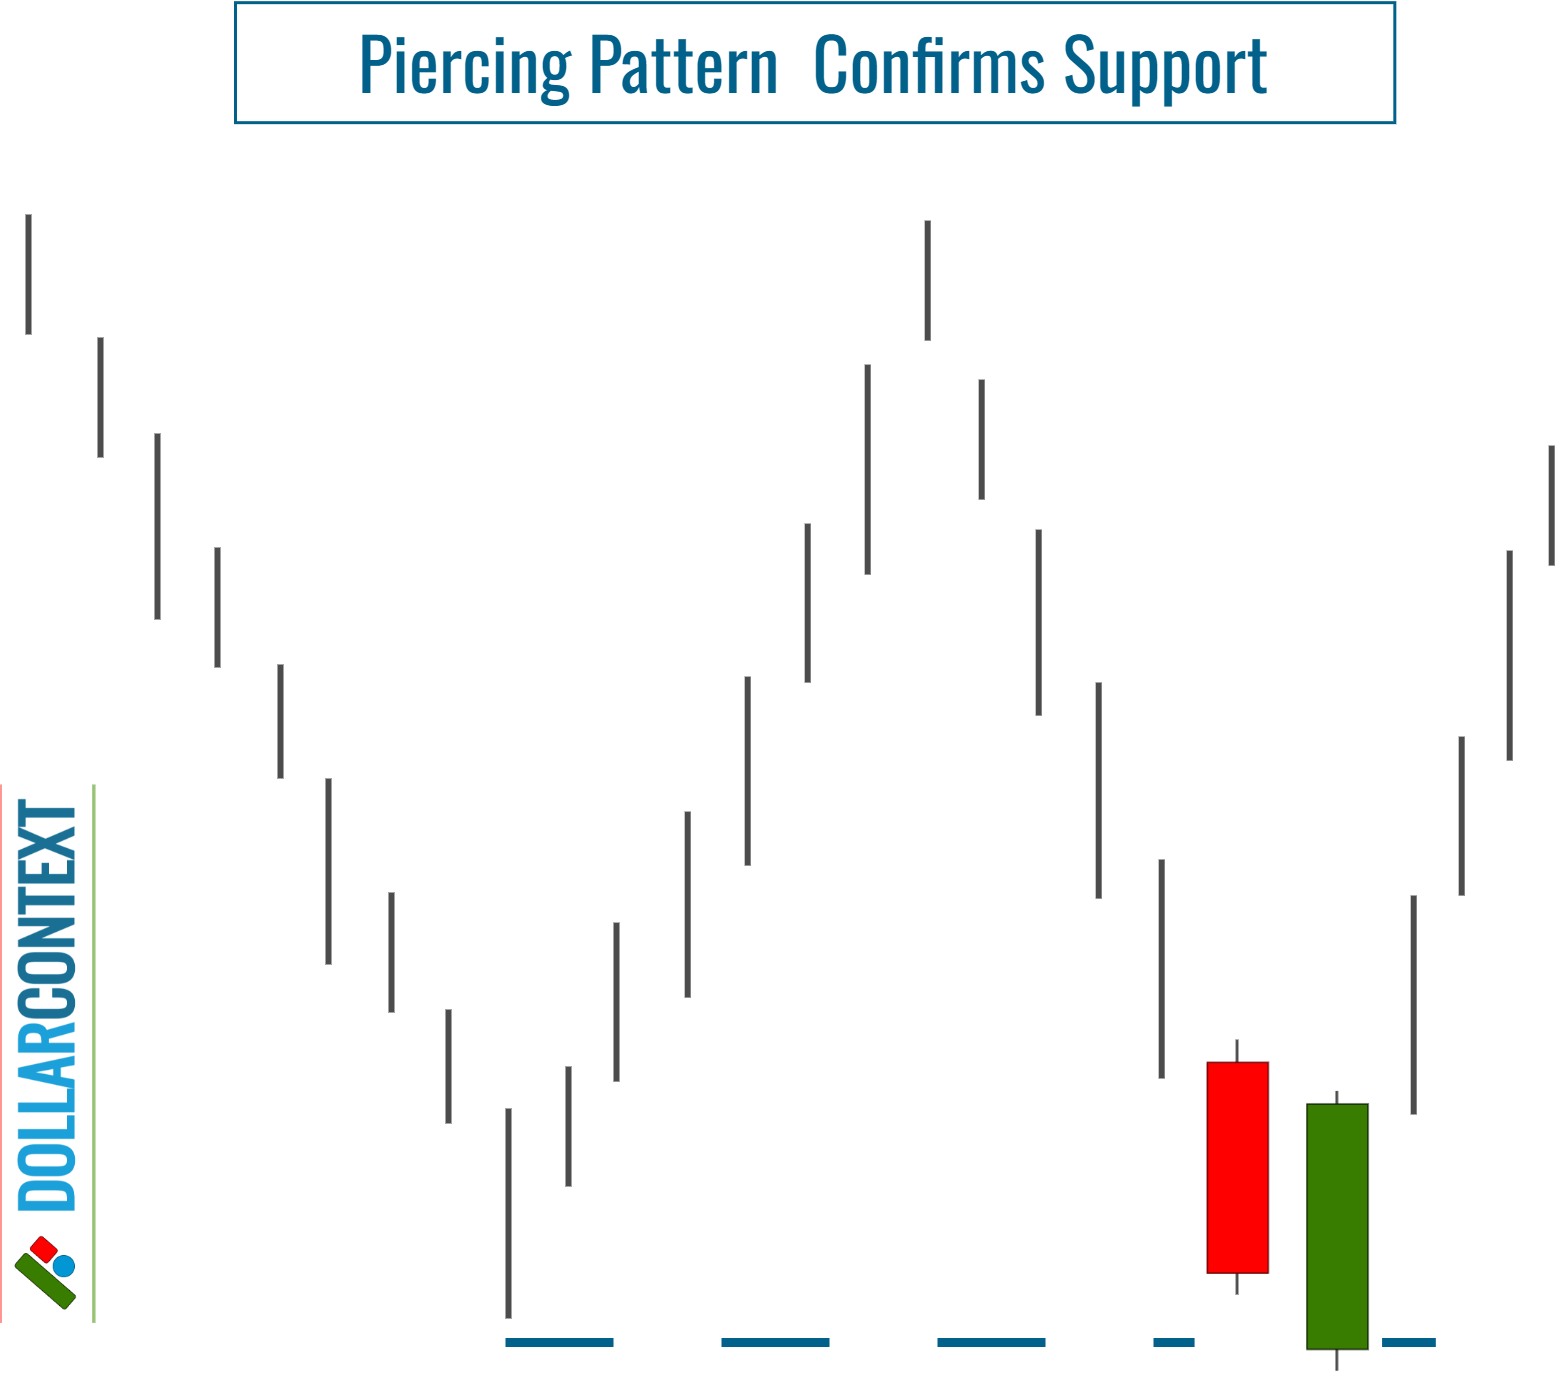 Piercing Pattern Confirms Support